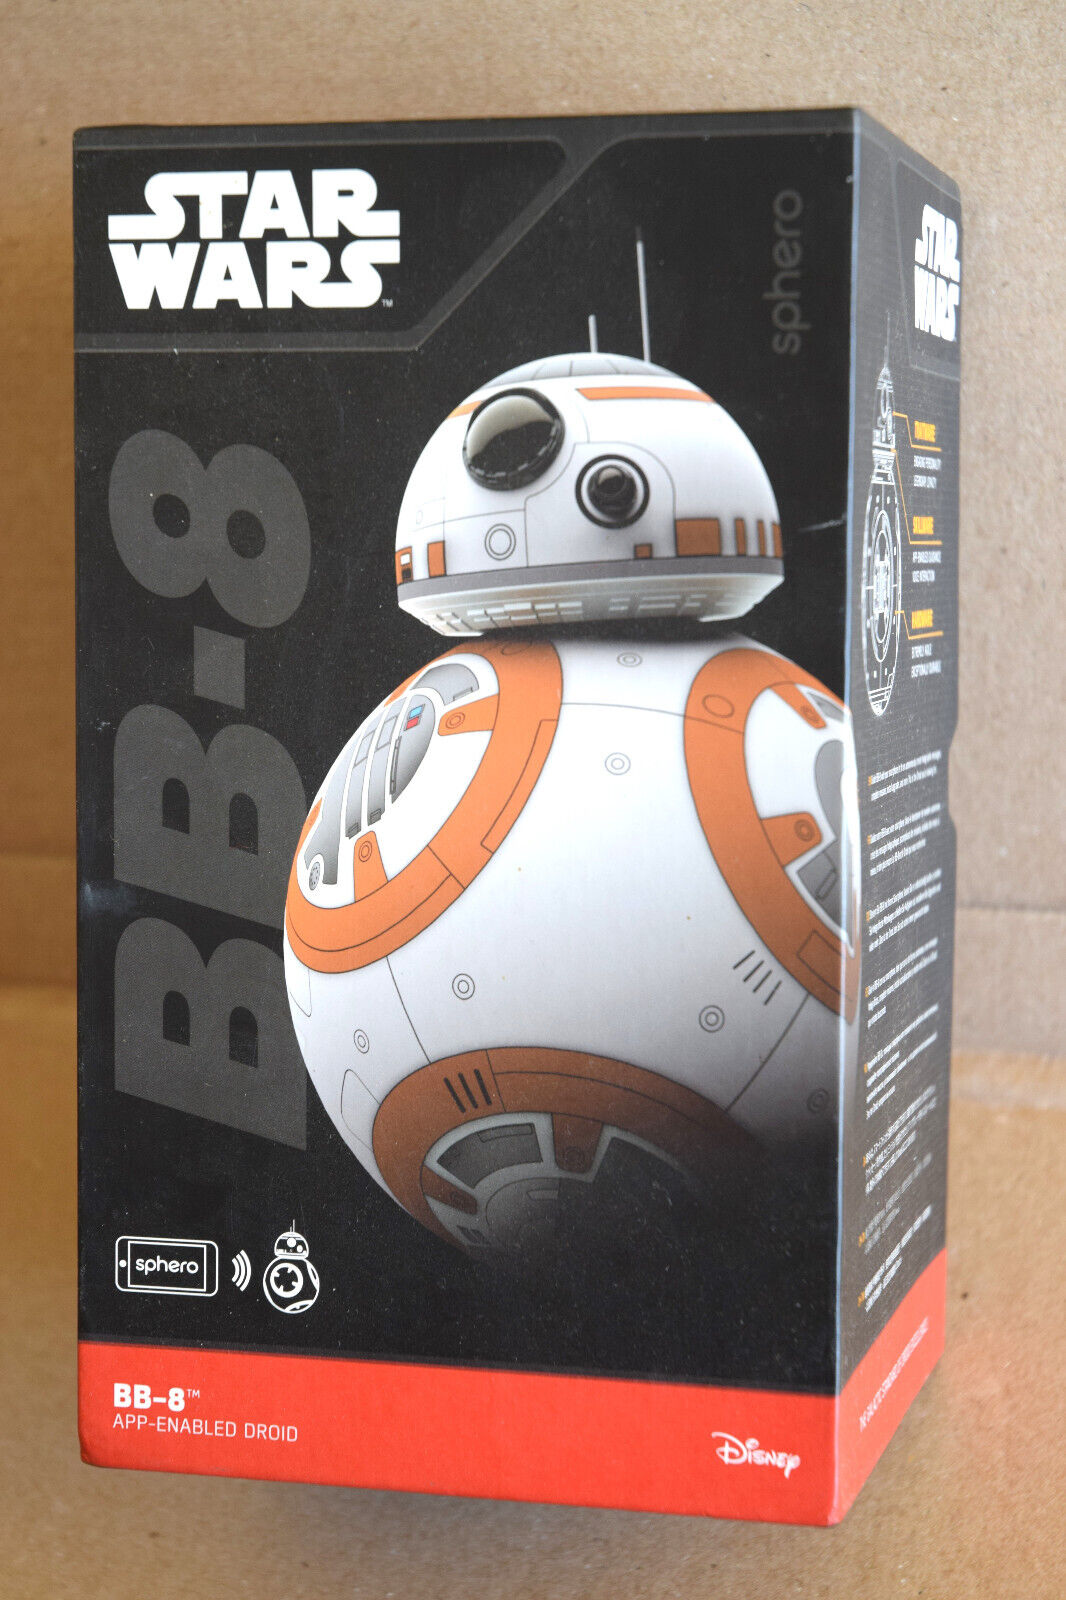 Sphero Star Wars Special Edition BB-8 App-Enabled Droid